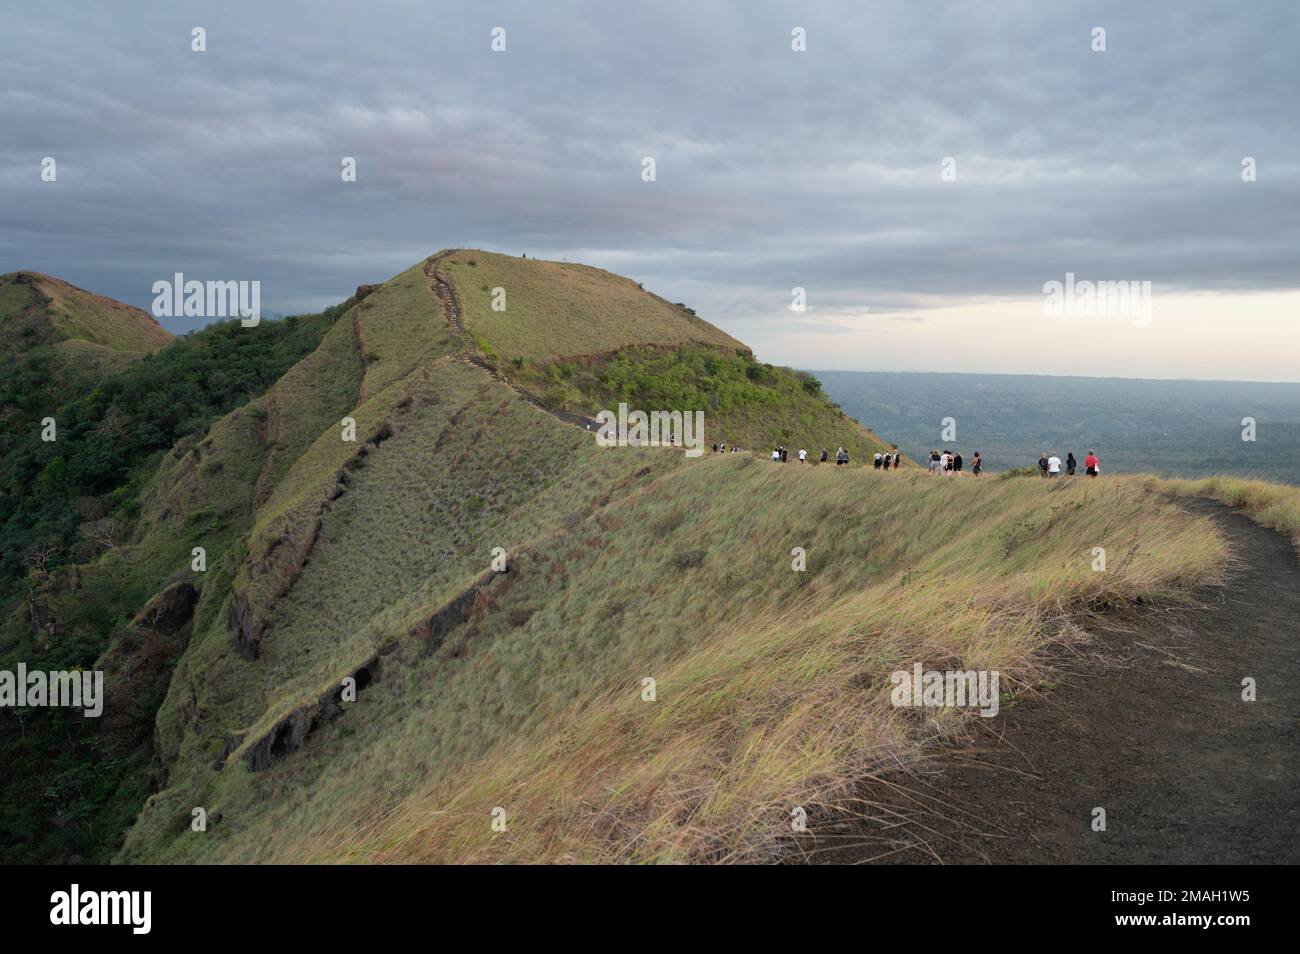 Group of tourist people on hike walking in volcano crater edge Stock Photo